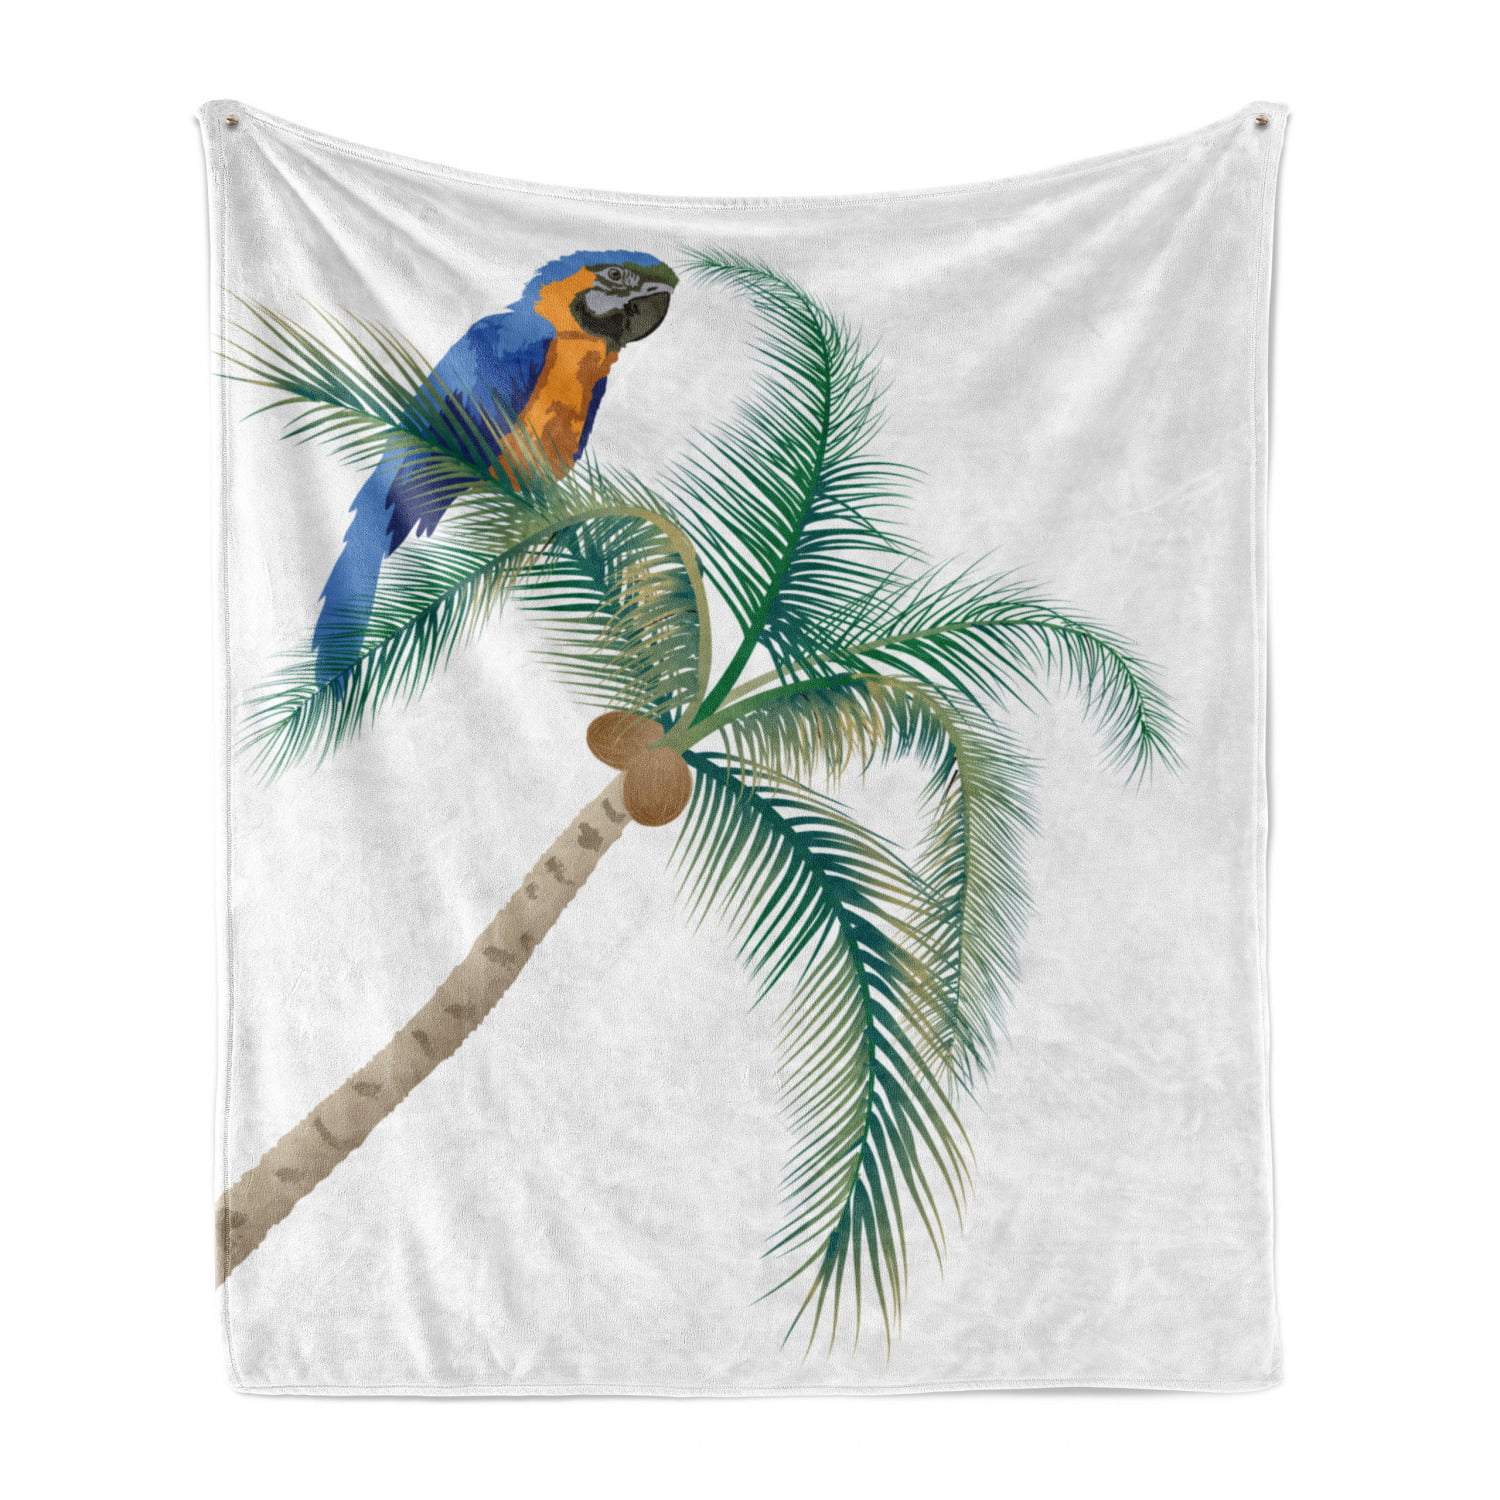 Fleece Throw Blanket Tree and Parrot Bird Soft Blankets and Throws for Sofa Bed Machine Washable 60x50 Inches